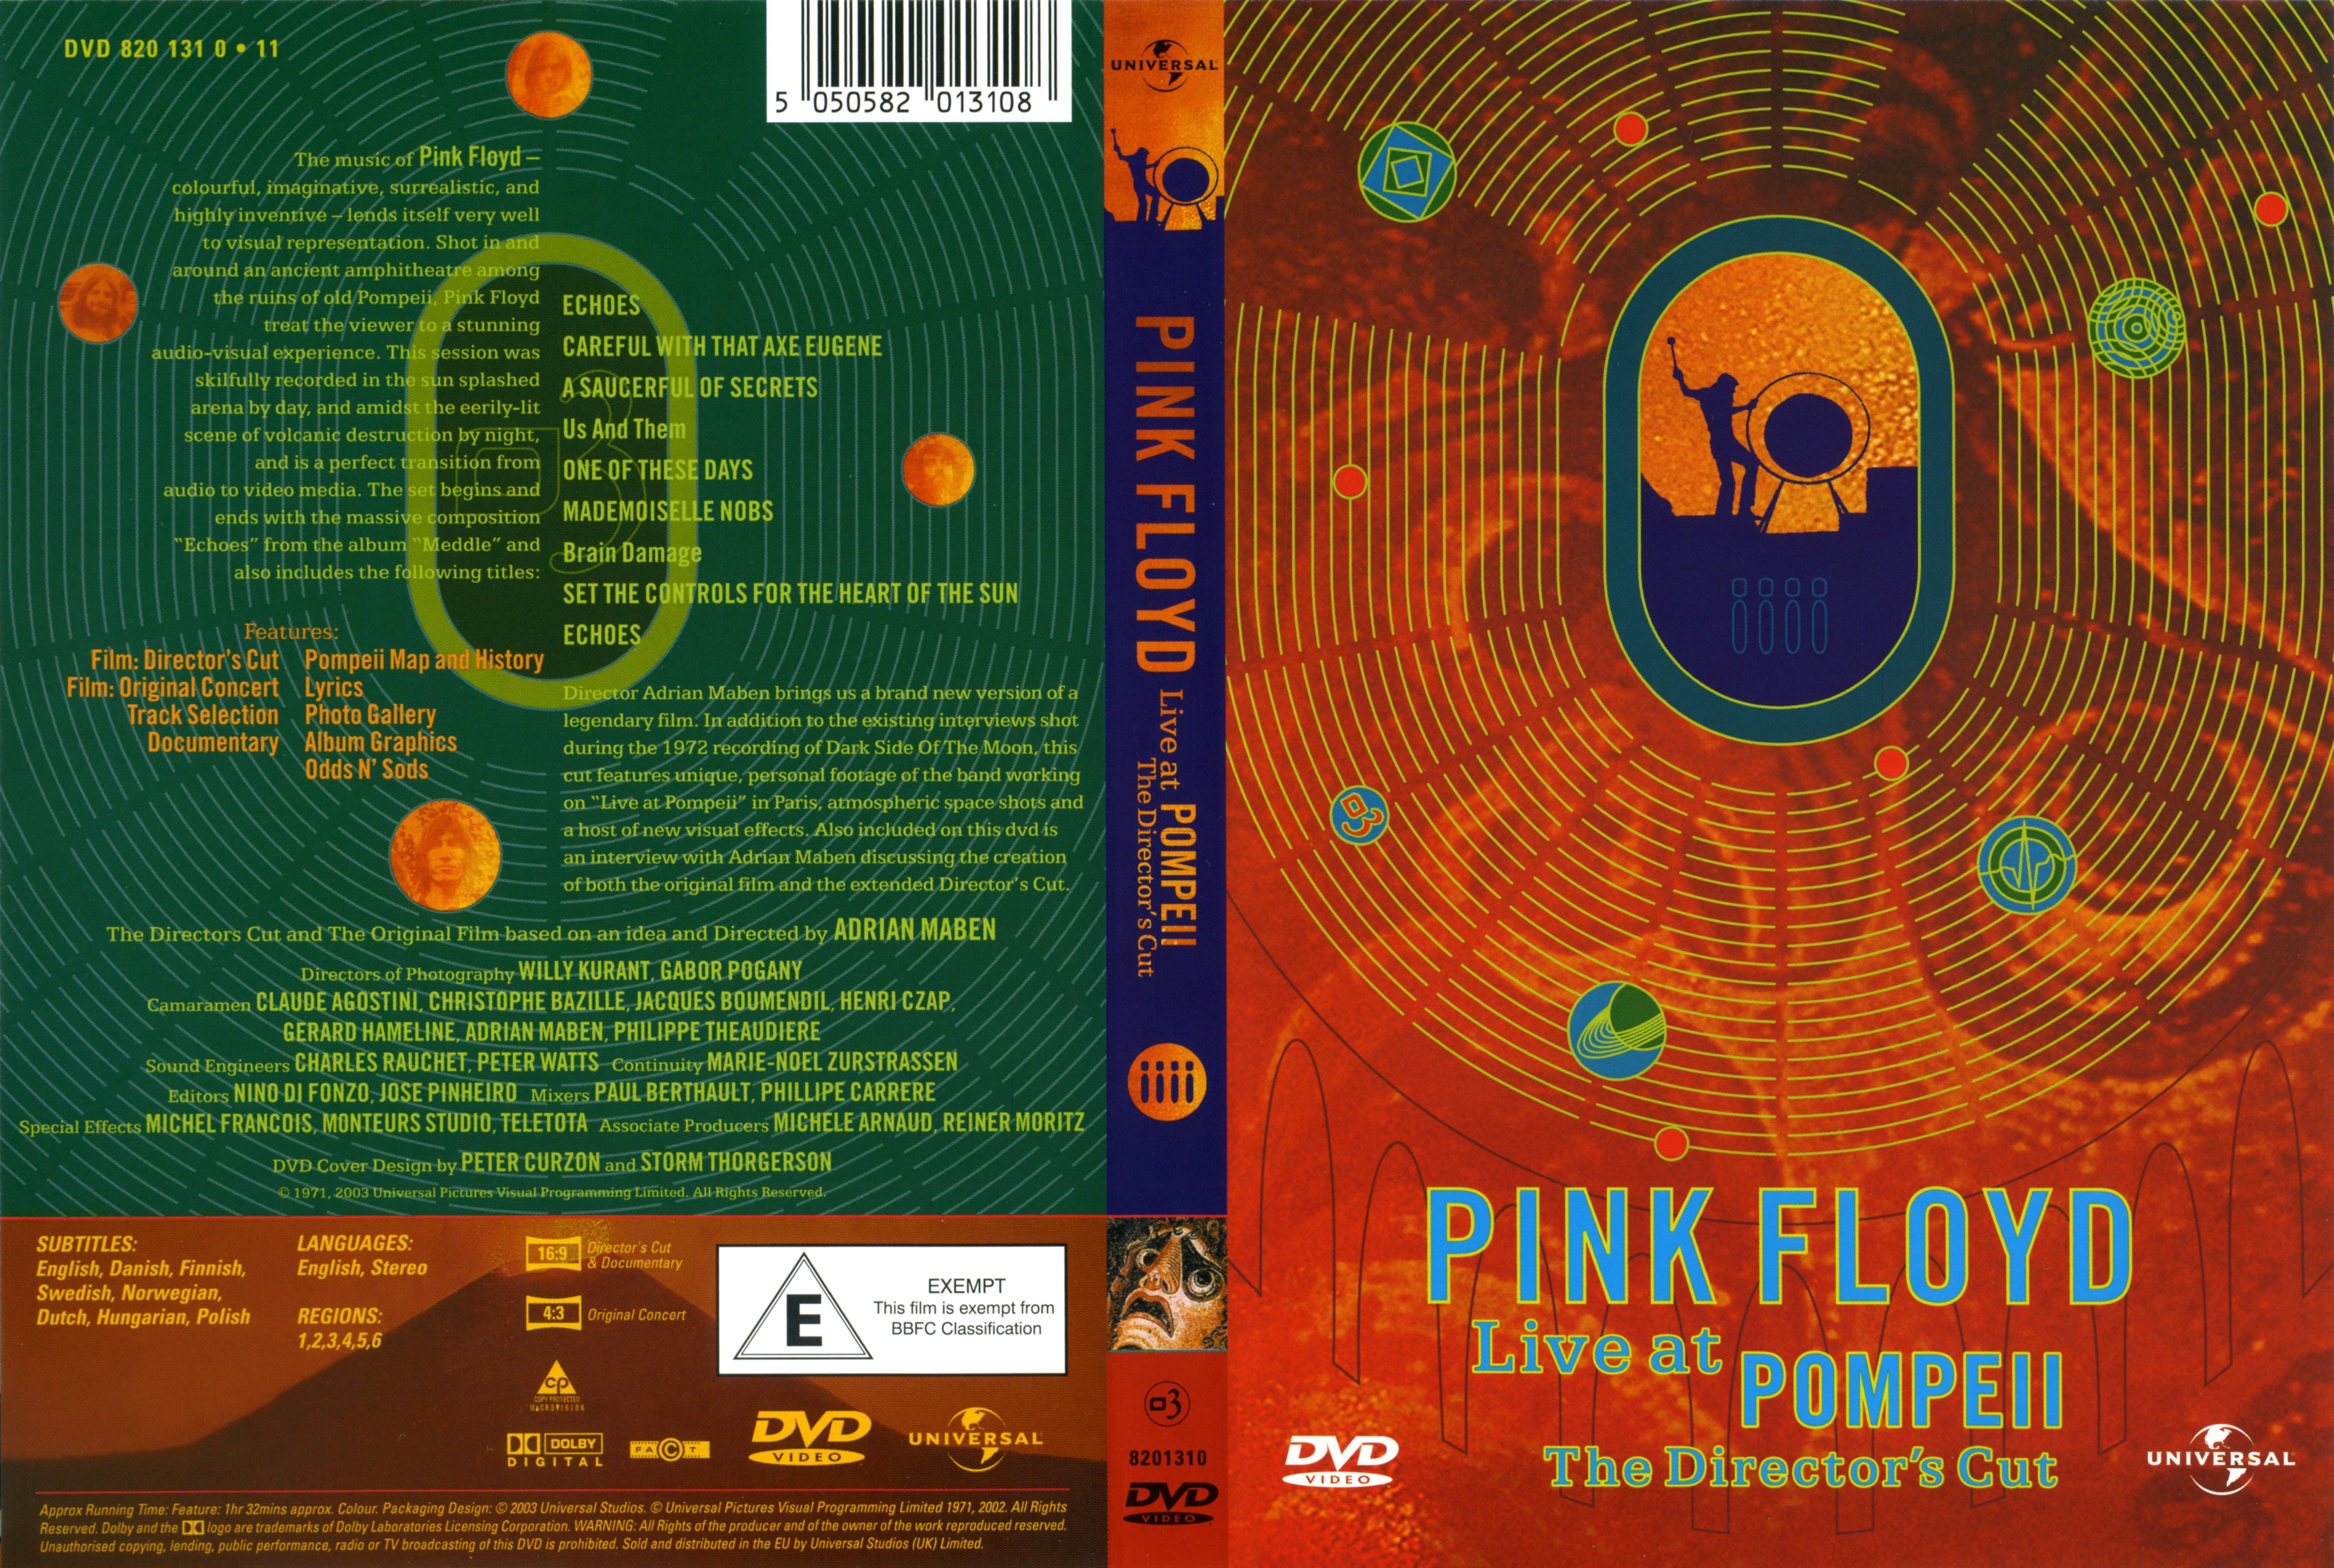 Jaquette DVD Pink Floyd Live at pompei